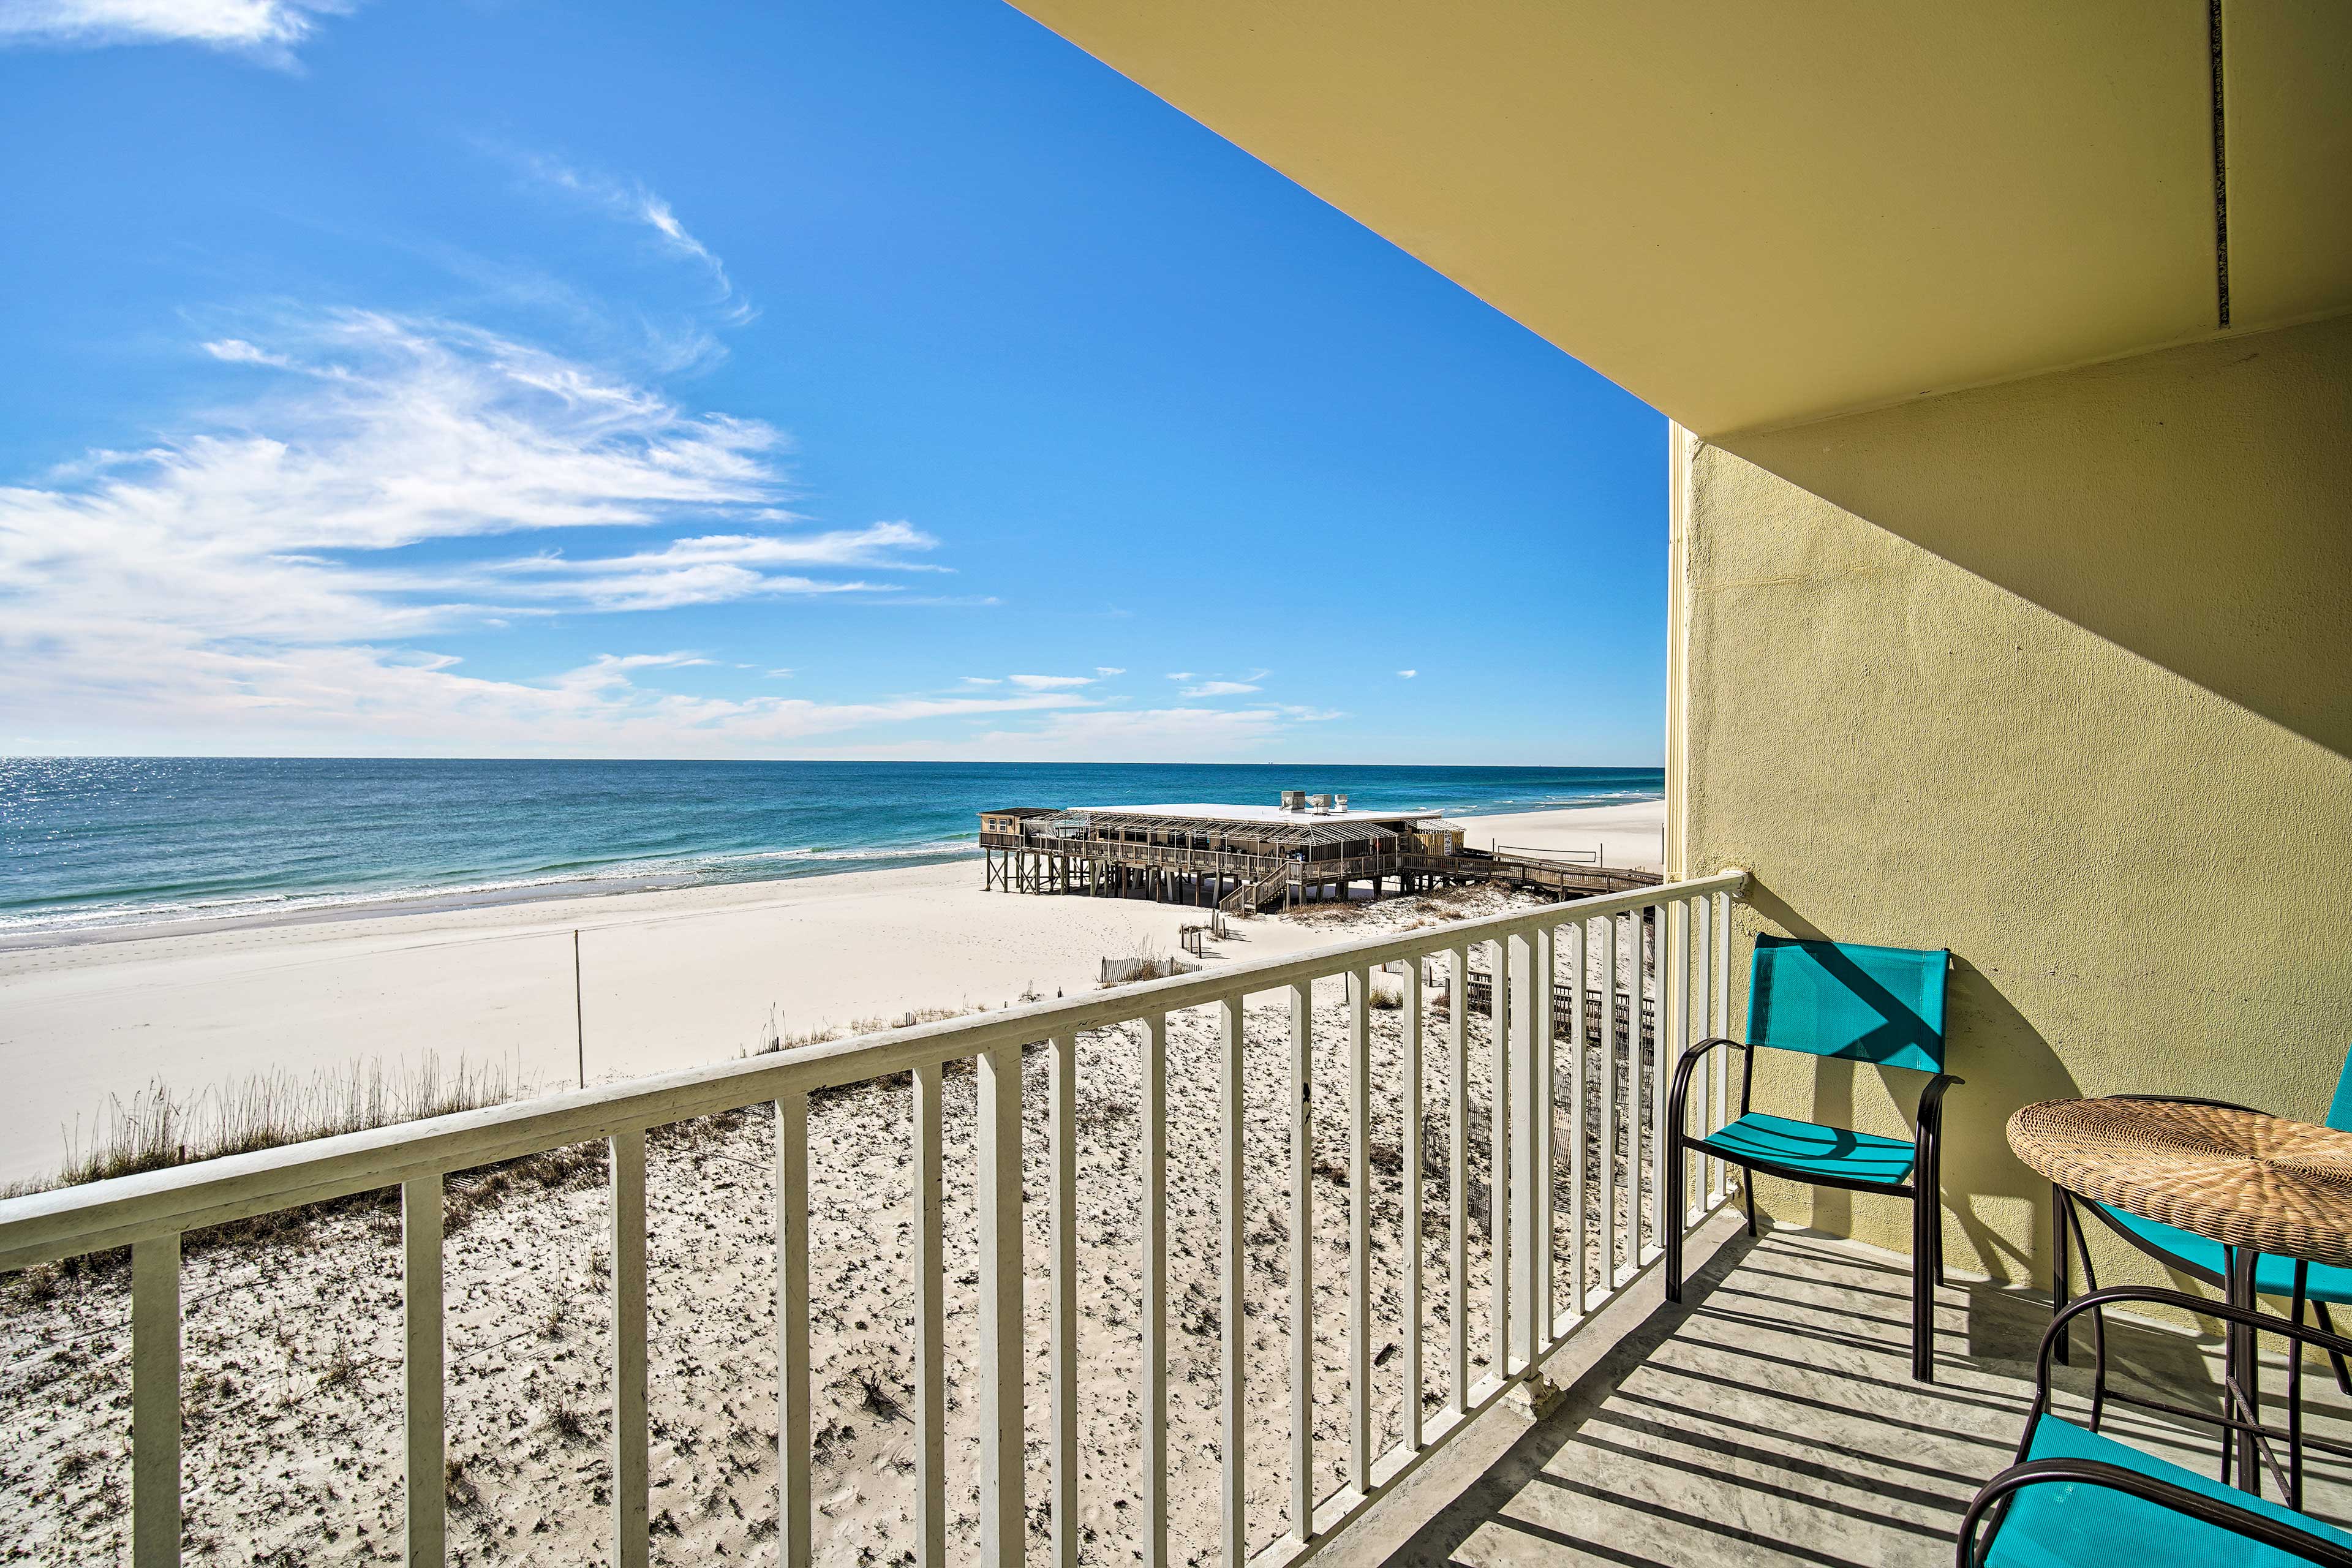 Gulf shores hotels on the beach with balcony